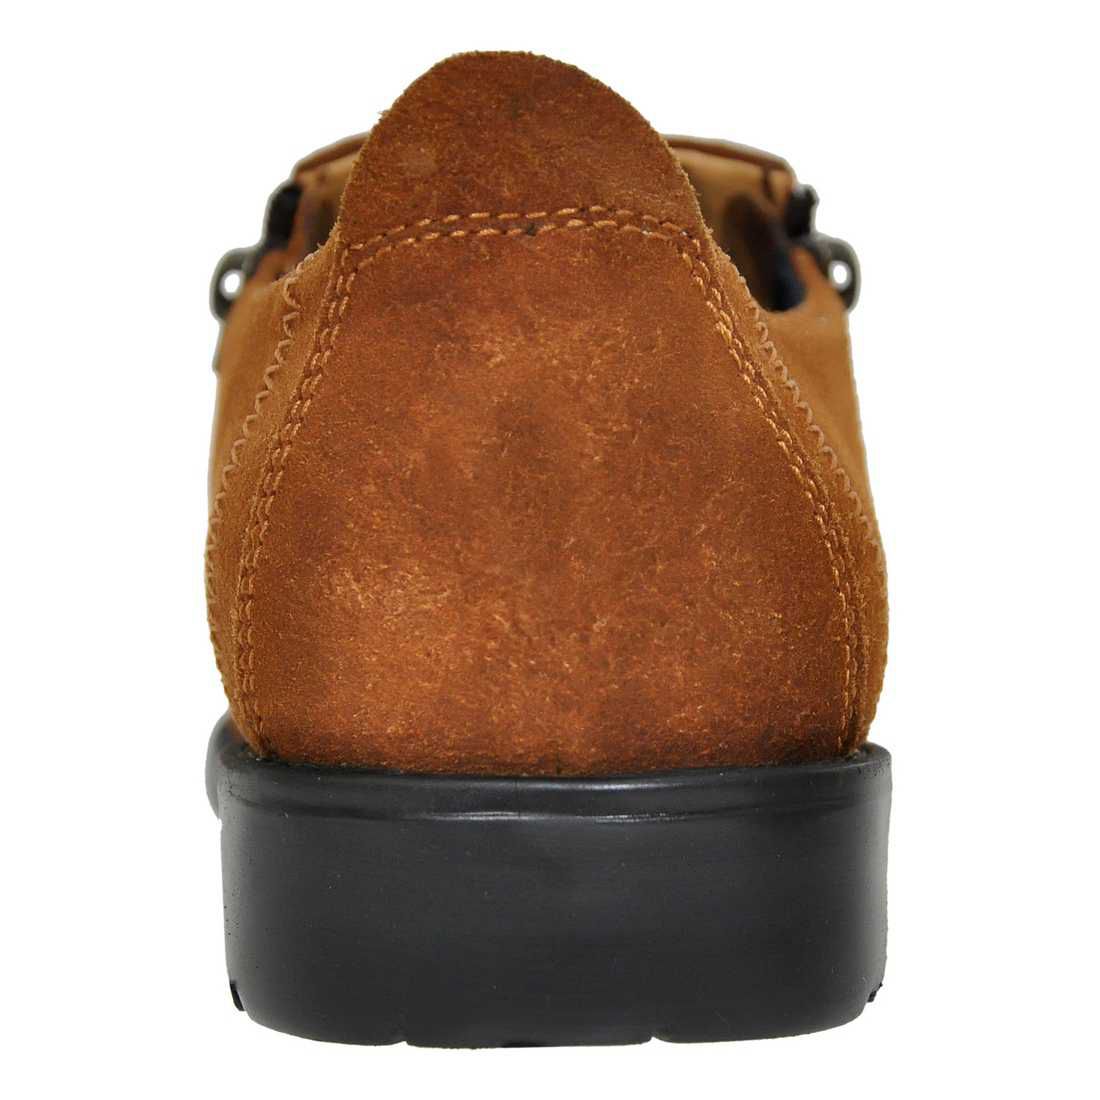 OHM New York Suede American Lifestyle Plain Toe Zip Closure Slip-on Leather Shoes